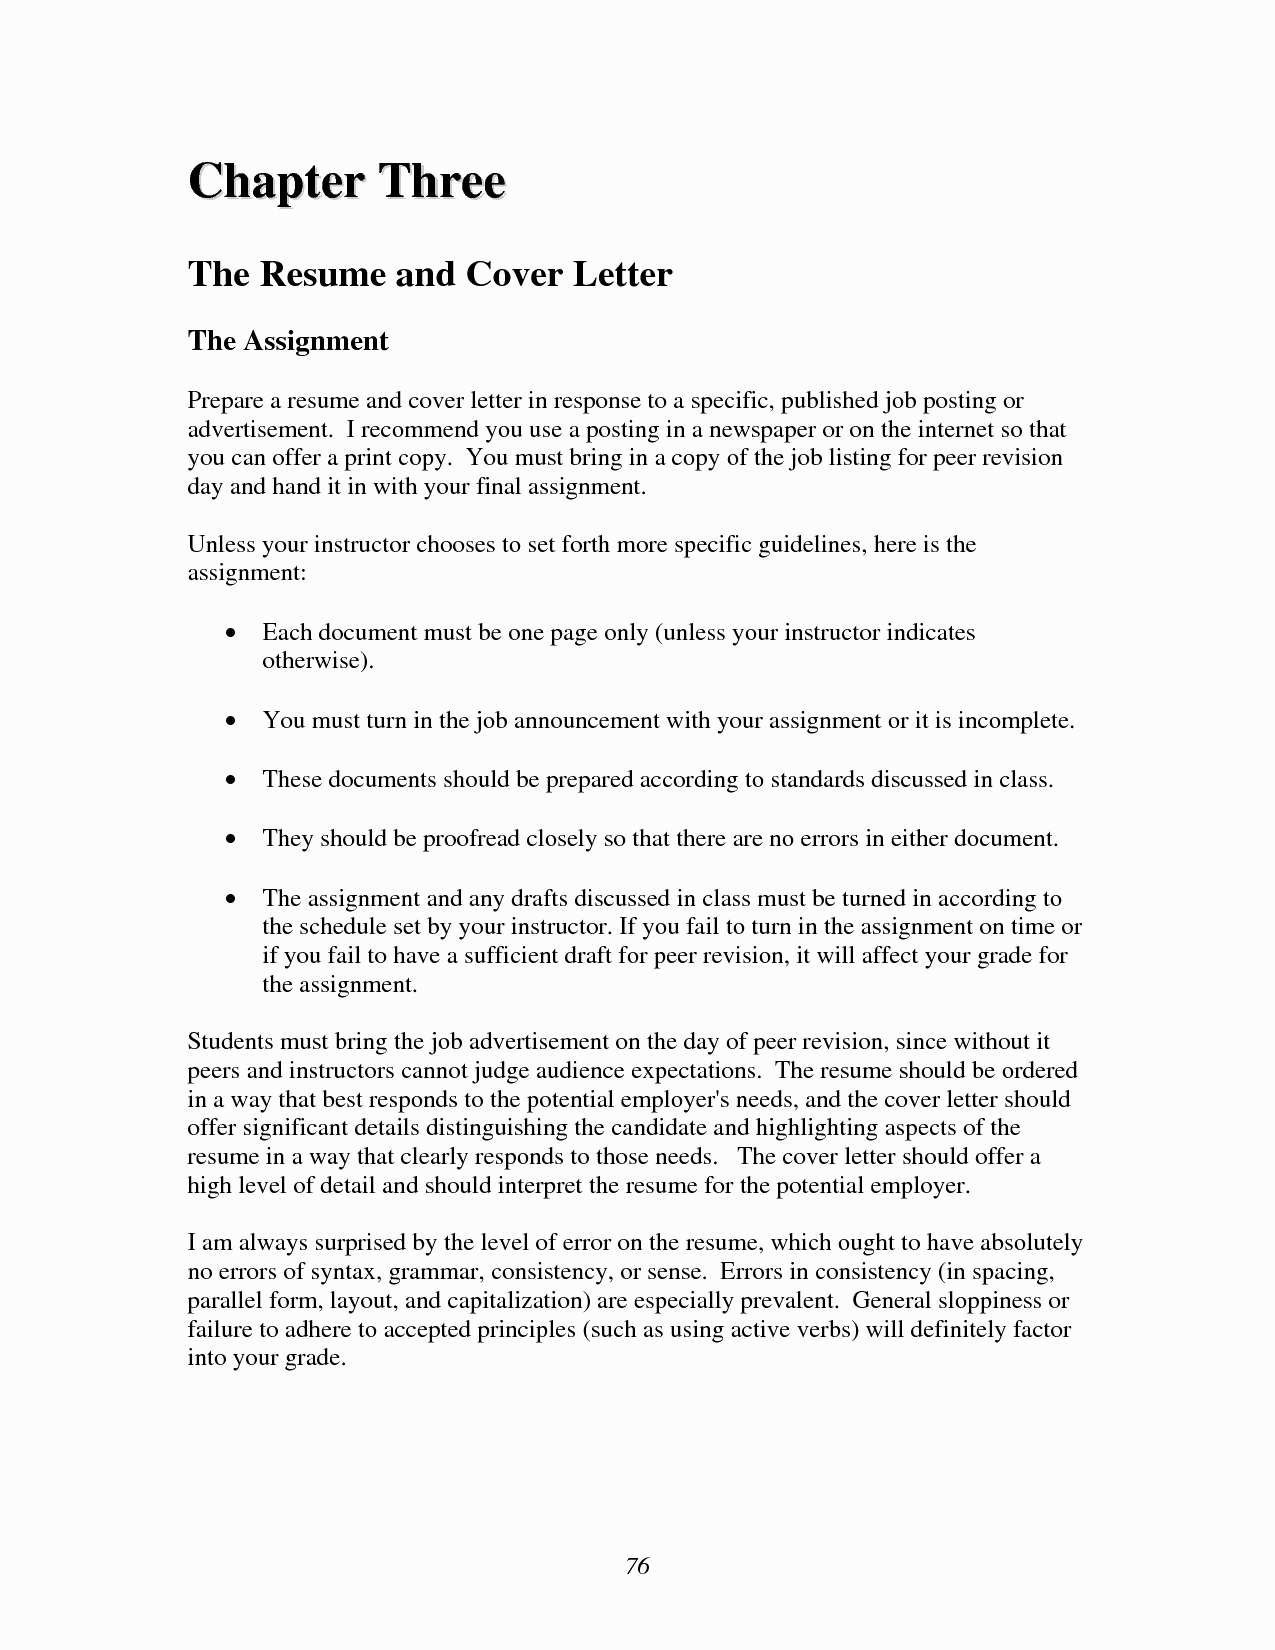 Cover Letter Template for It Job - Resume and Cover Letter Template Beautiful Fresh Job Fer Letter